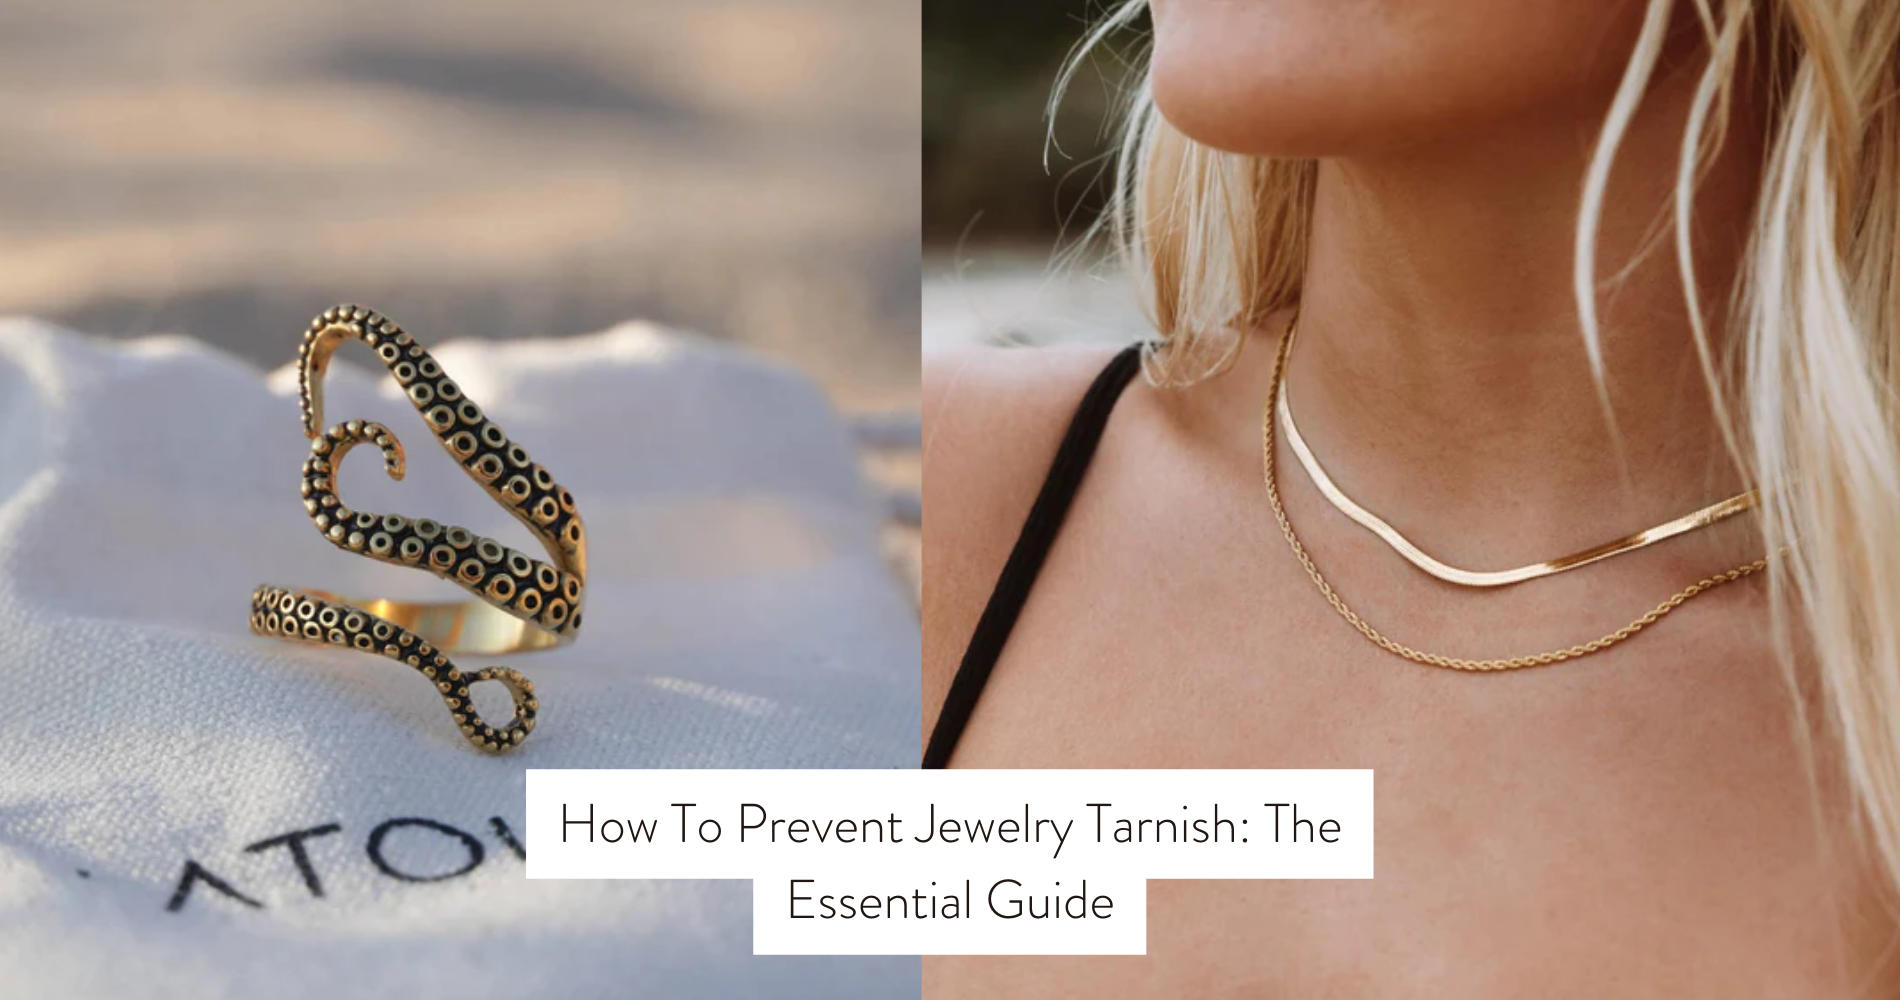 How To Prevent Jewelry Tarnish: The Essential Guide